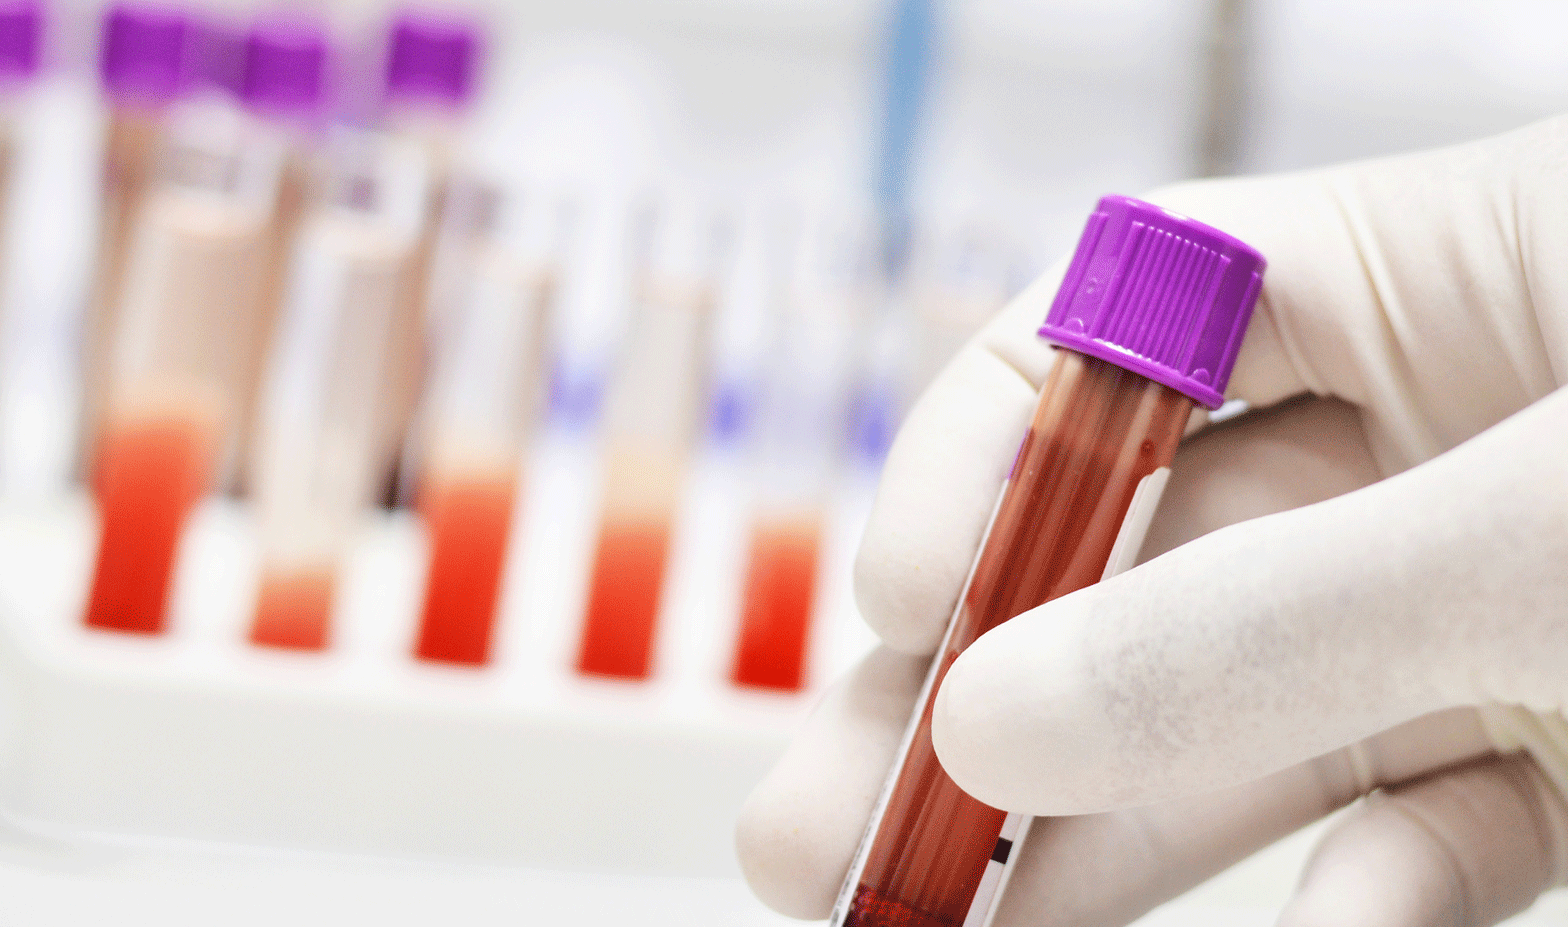 blood samples in a lab